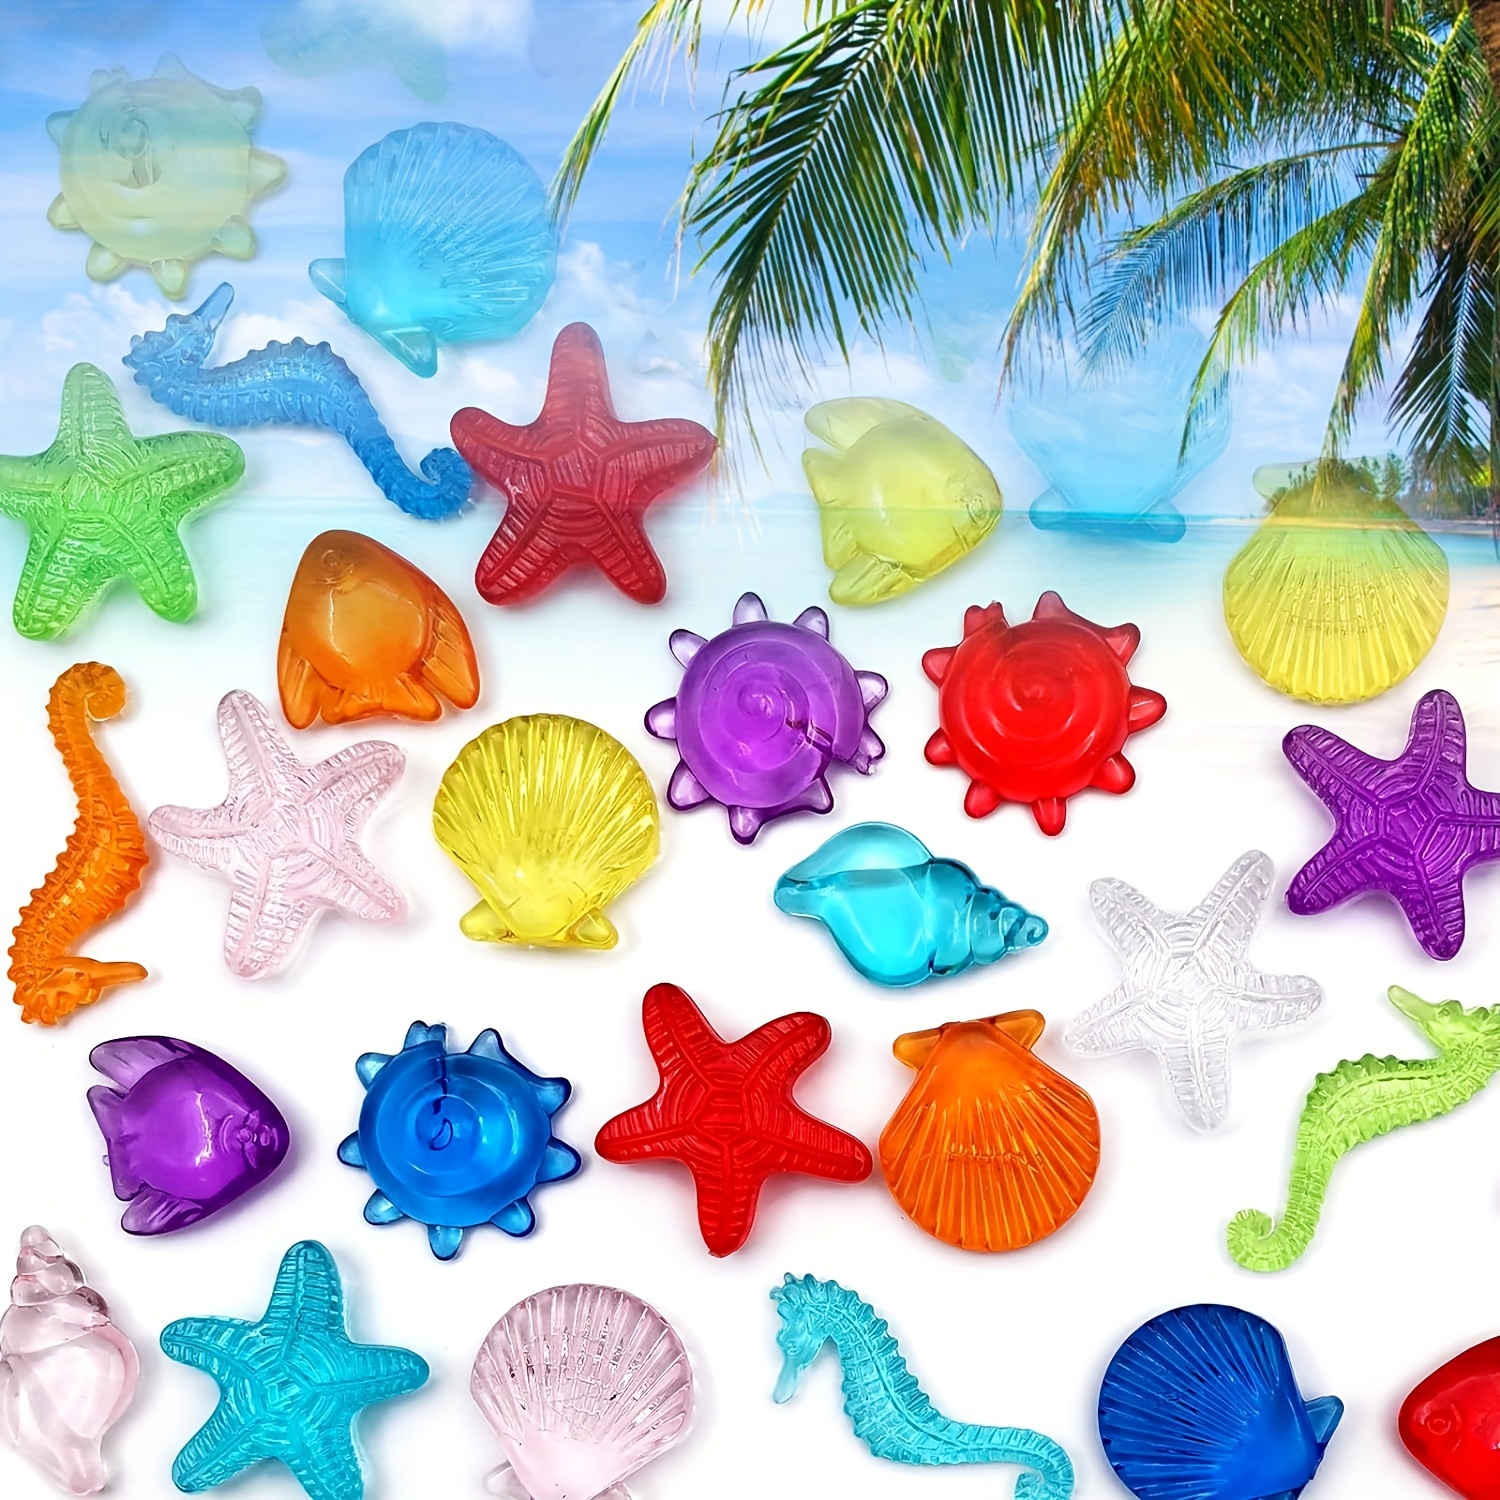 

20pcs Colorful Acrylic Shells For Beach-themed Decorations And Crafts - Perfect For Weddings, Parties, And Home Decor